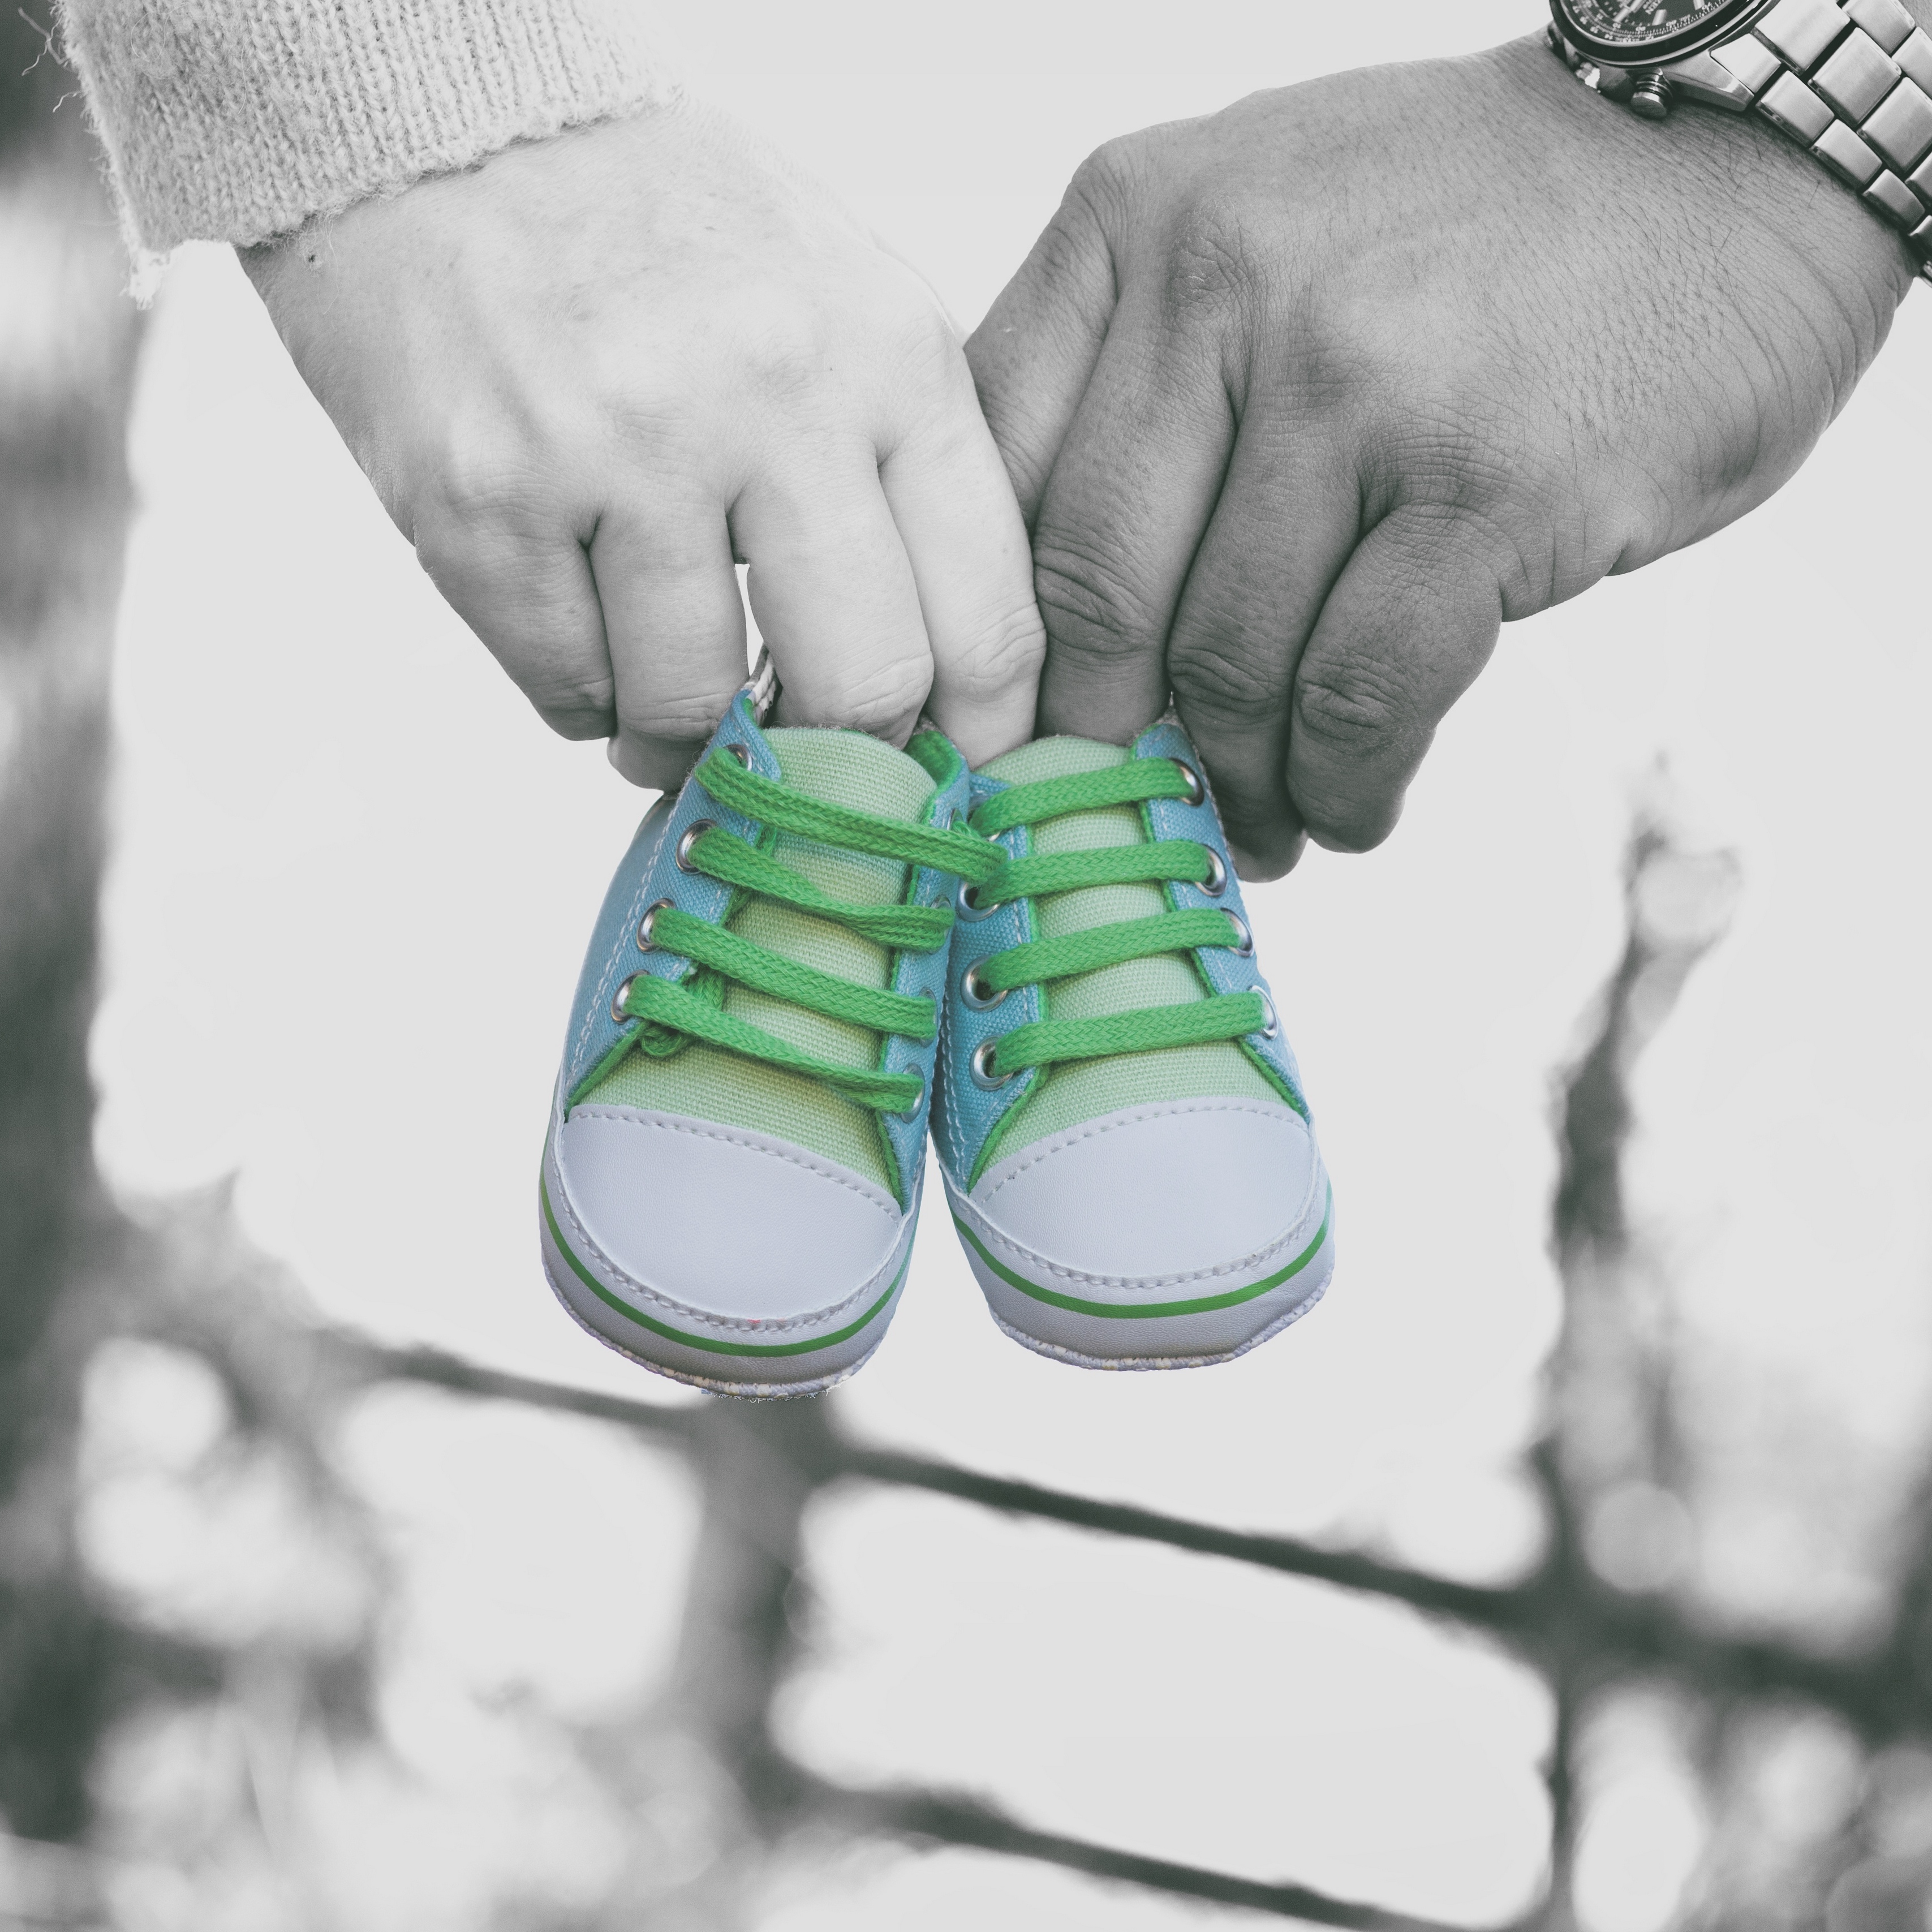 Wallpaper Shoes, Hands, Child, Love - Baby Shoes In Hands - HD Wallpaper 